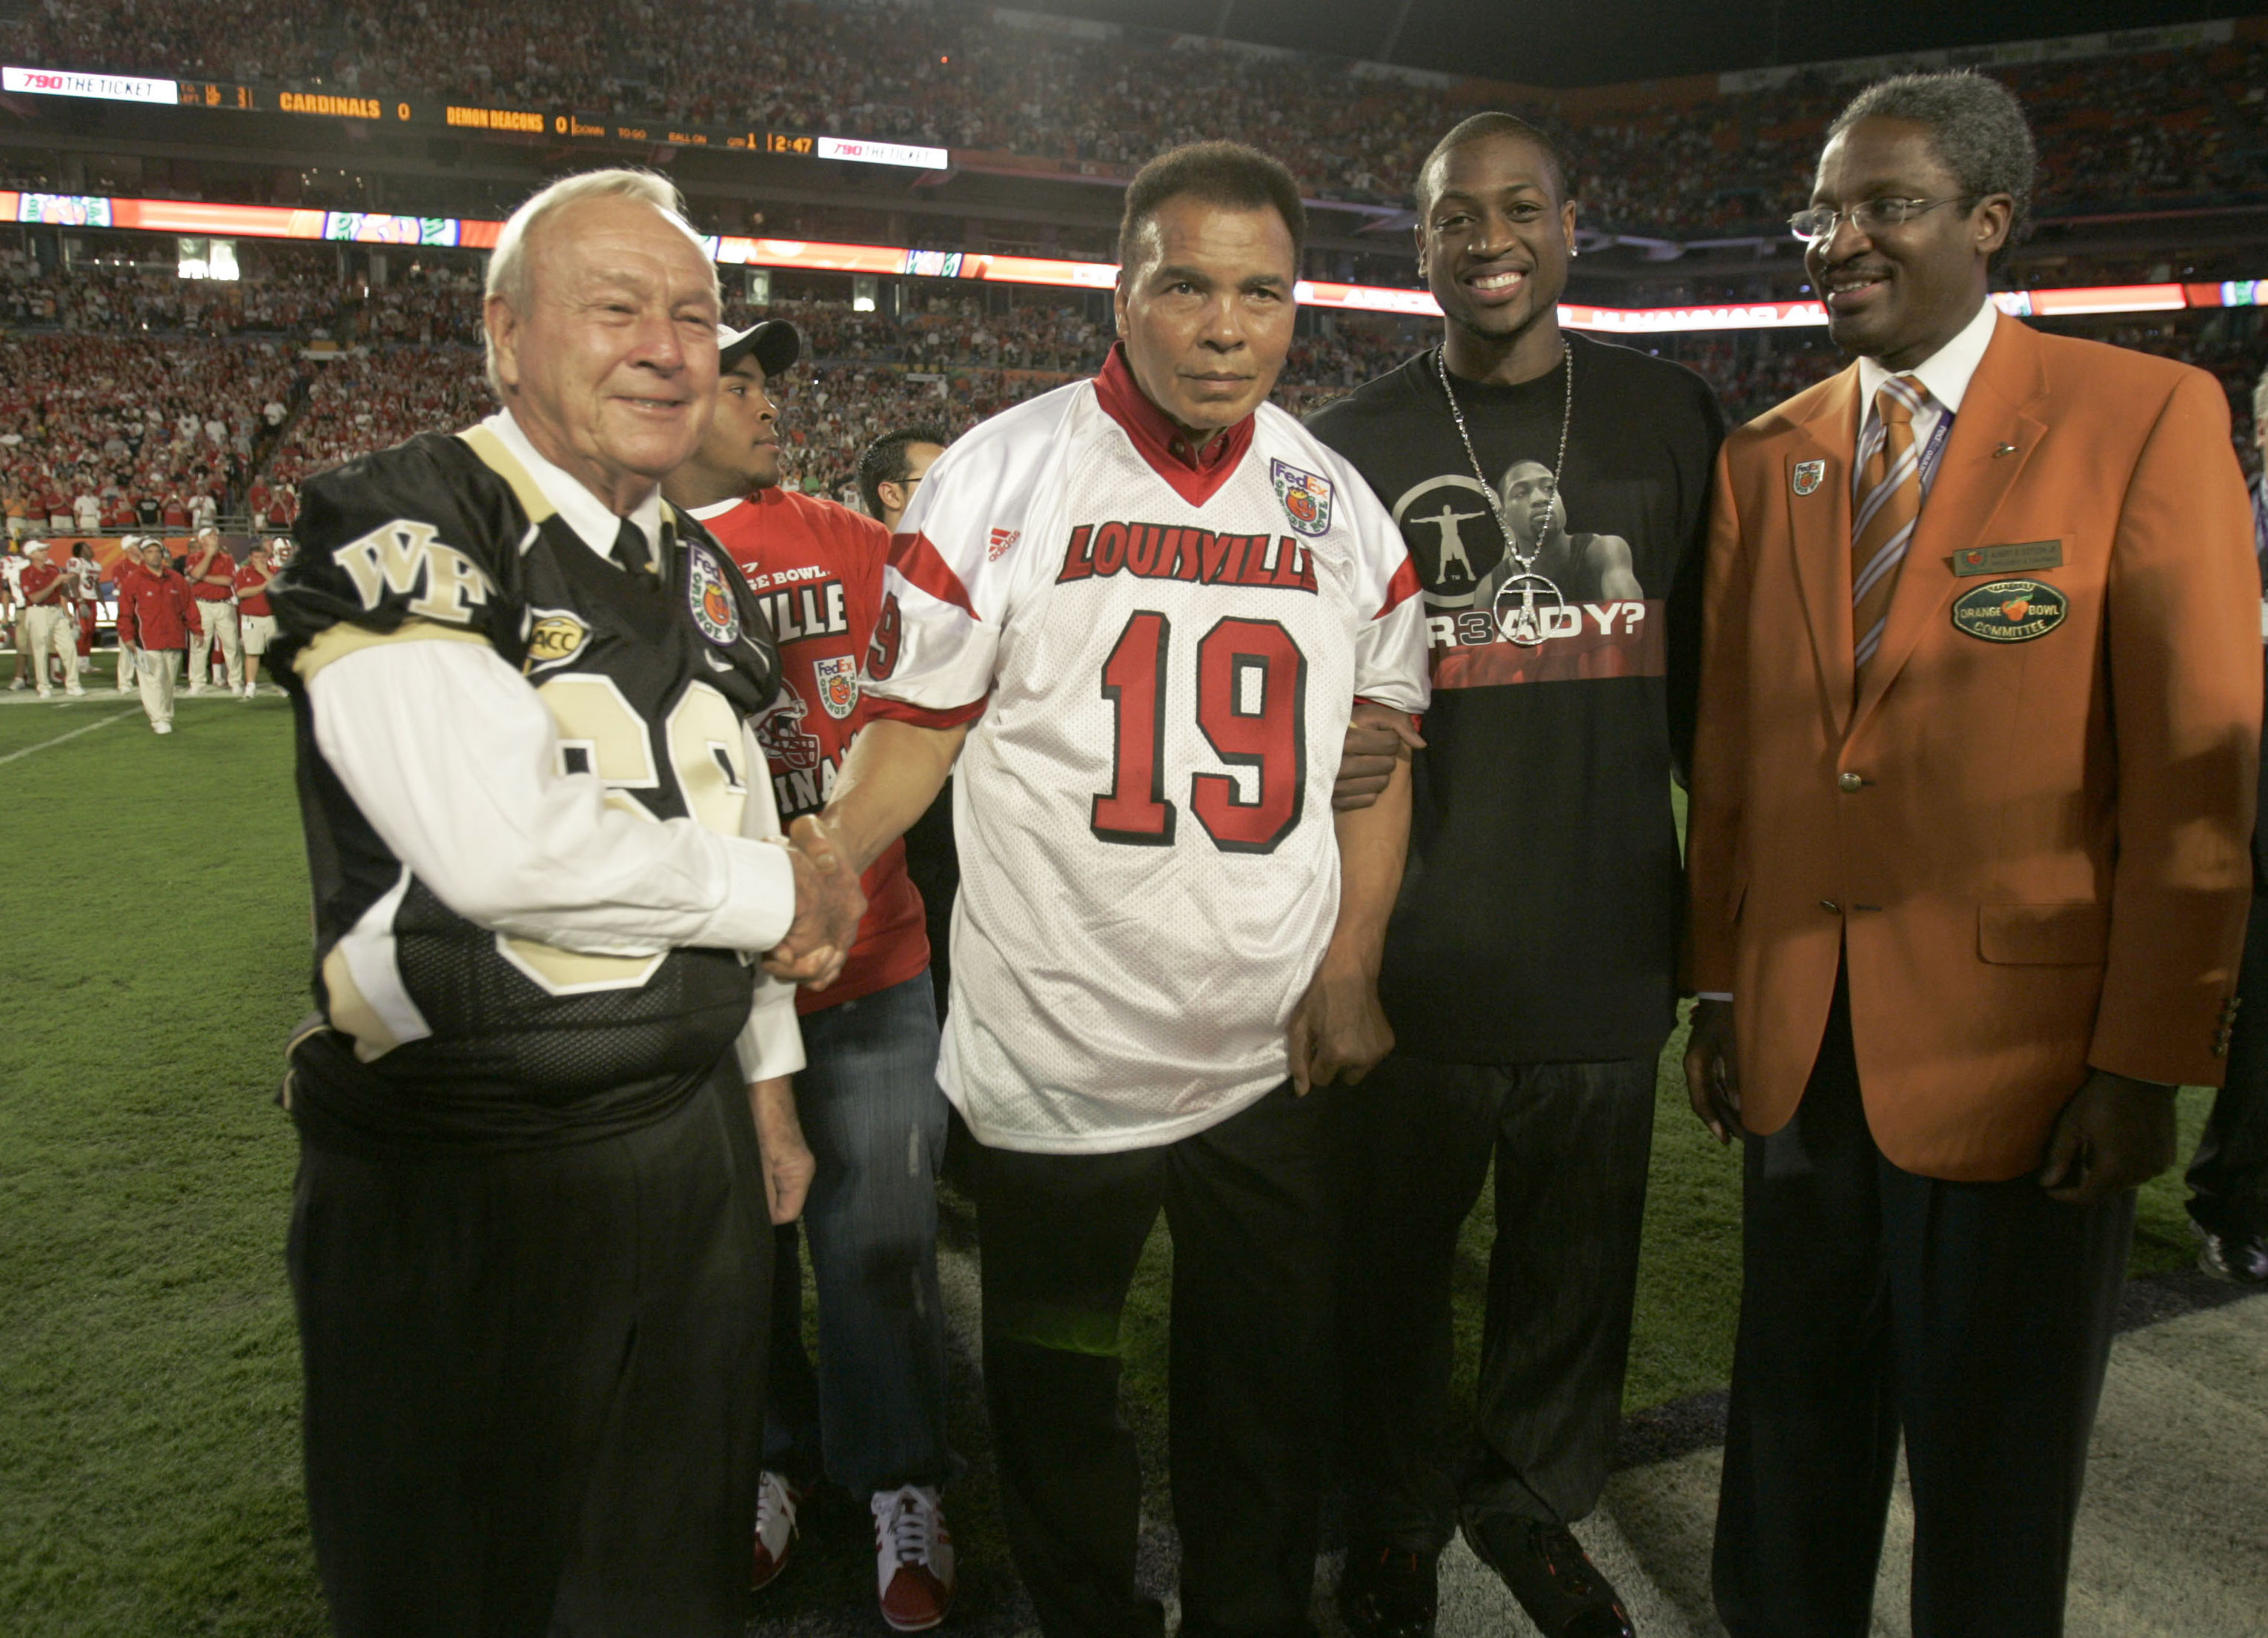 Golf great Arnold Palmer greets boxing legend Muhammad Ali and Miami Heat player Dwyane Wade prior to the coin toss at the Orange Bowl in Miami in 2006. (Lynne Sladky/Associated Press)